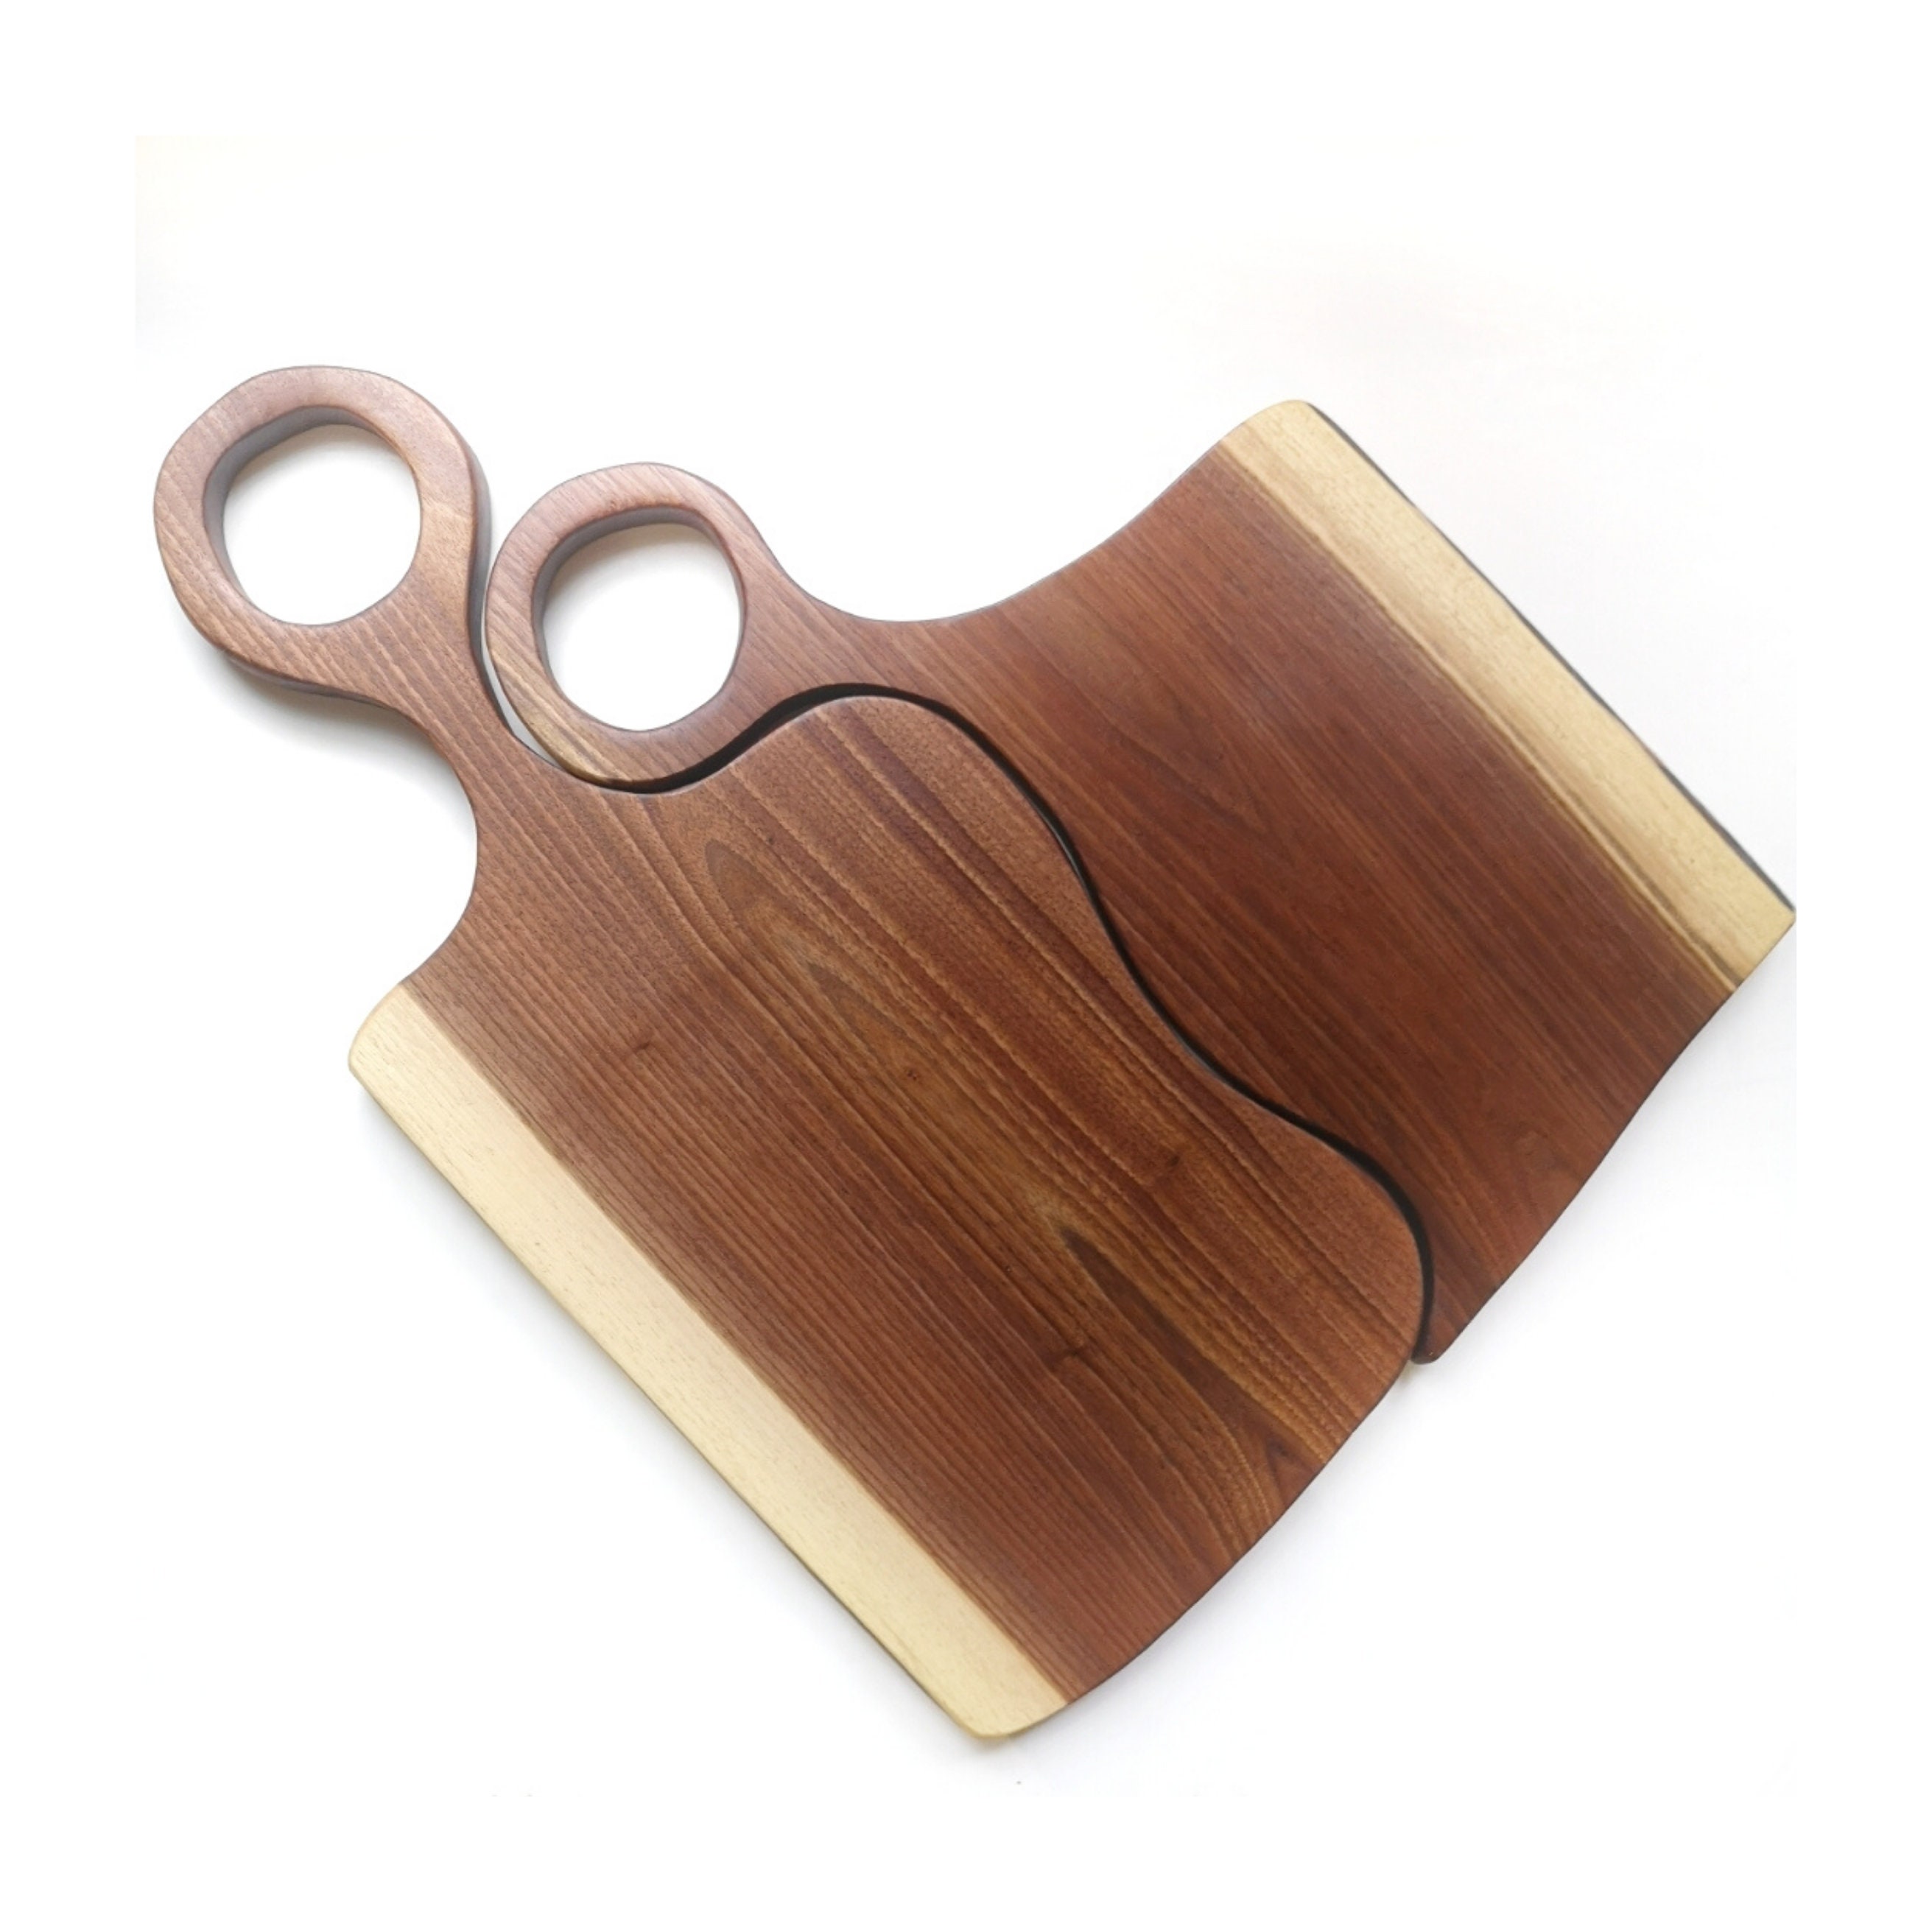 Wood Or Plastic Cutting Board For Meat - Which Is Best? - Butcher Magazine